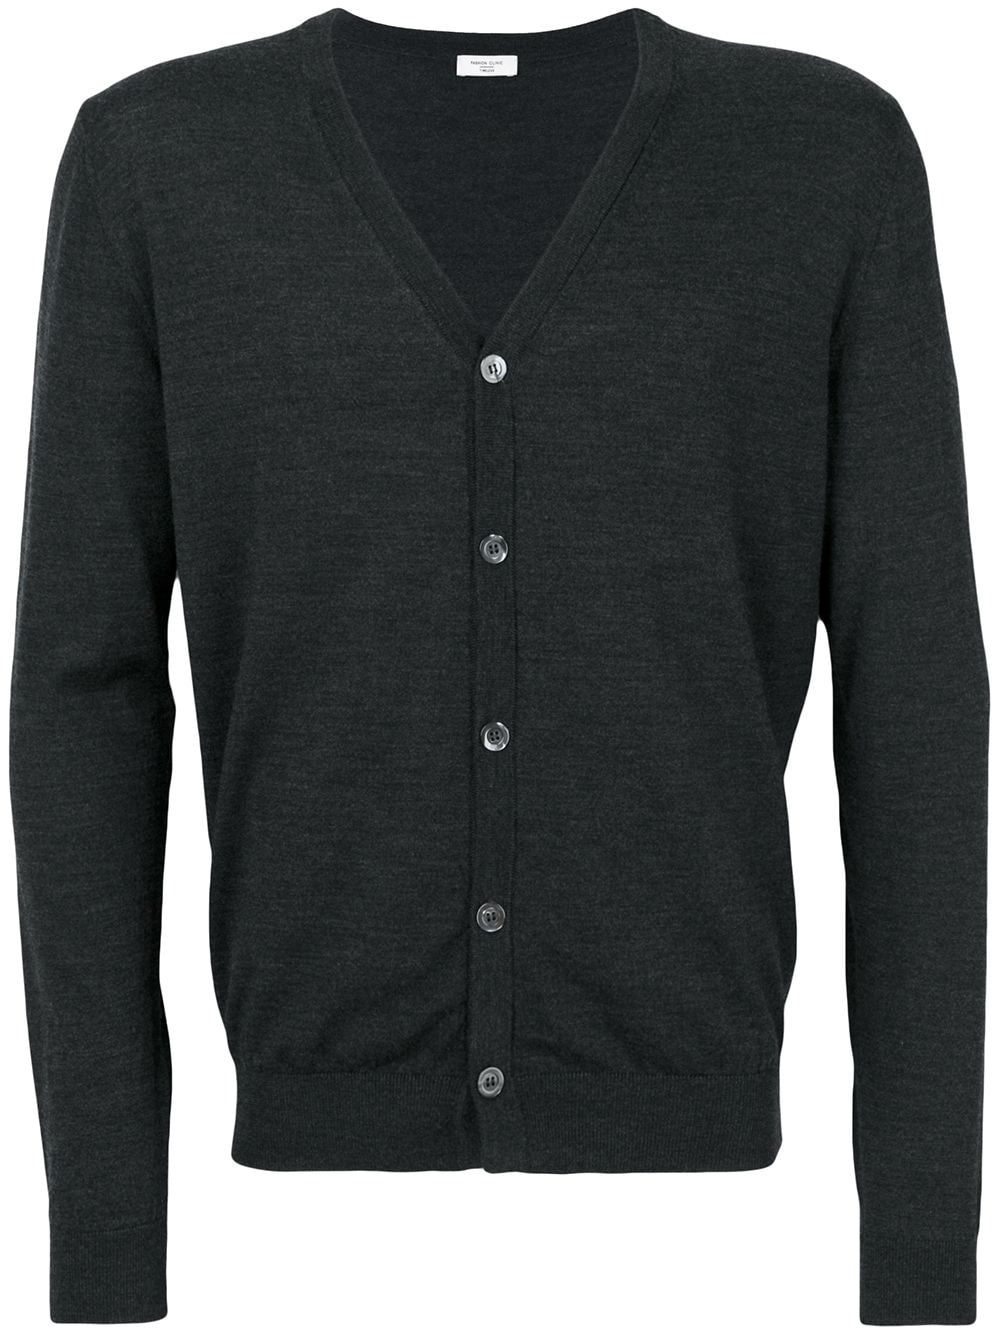 Spring Cardigan Codes! Introduction of men's outfits as a reference for ...